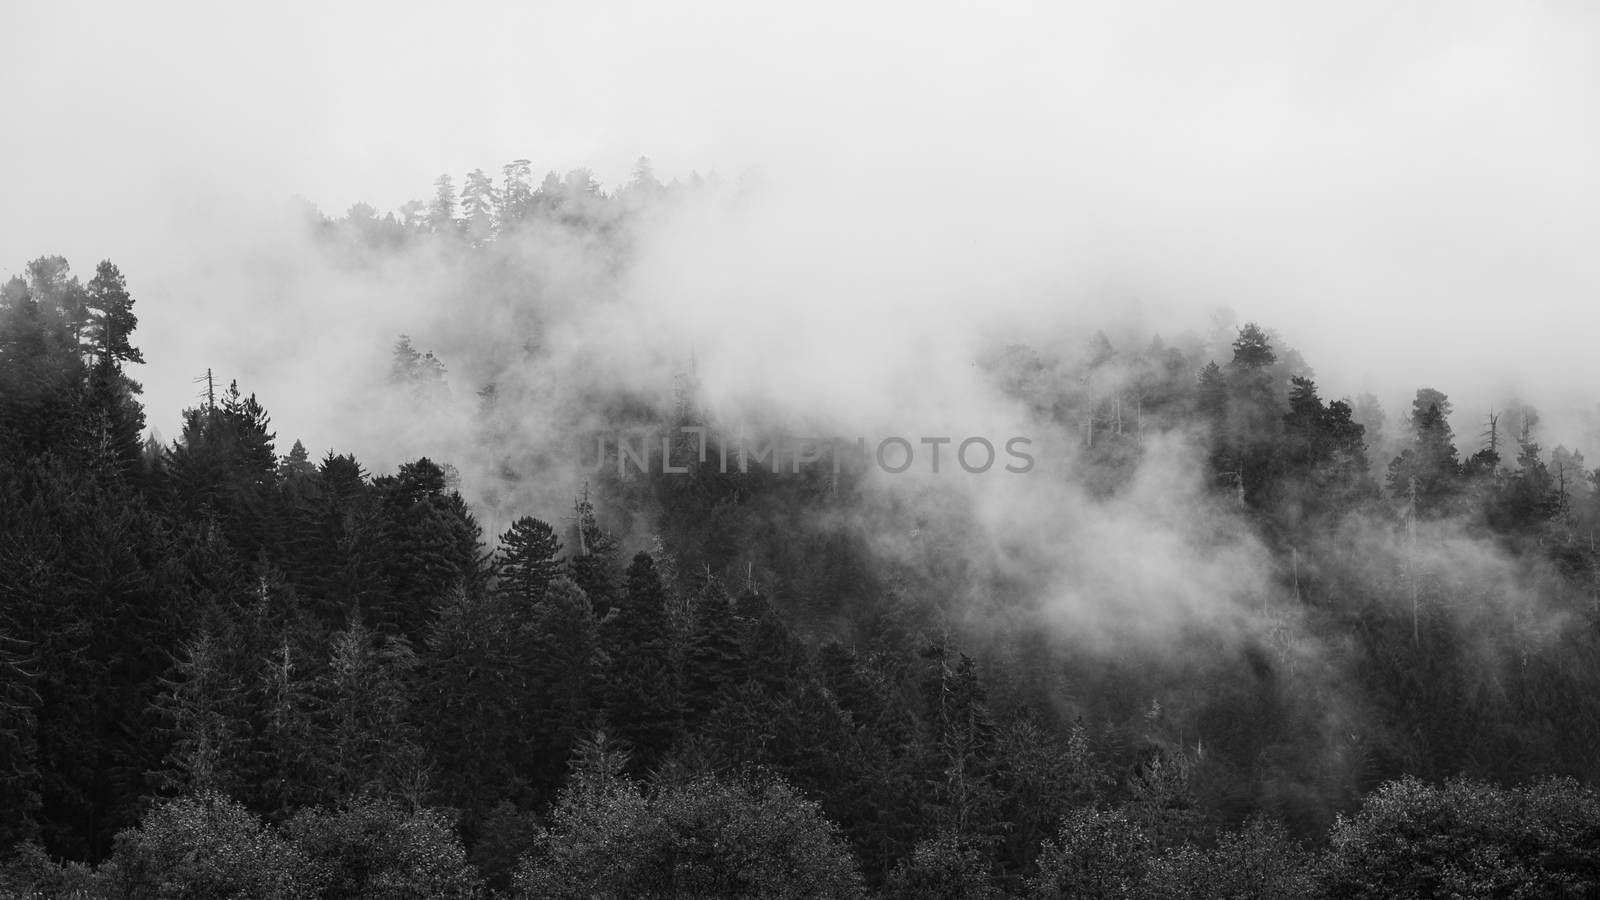 Redwood Forest Landscape in Beautiful Northern California by backyard_photography